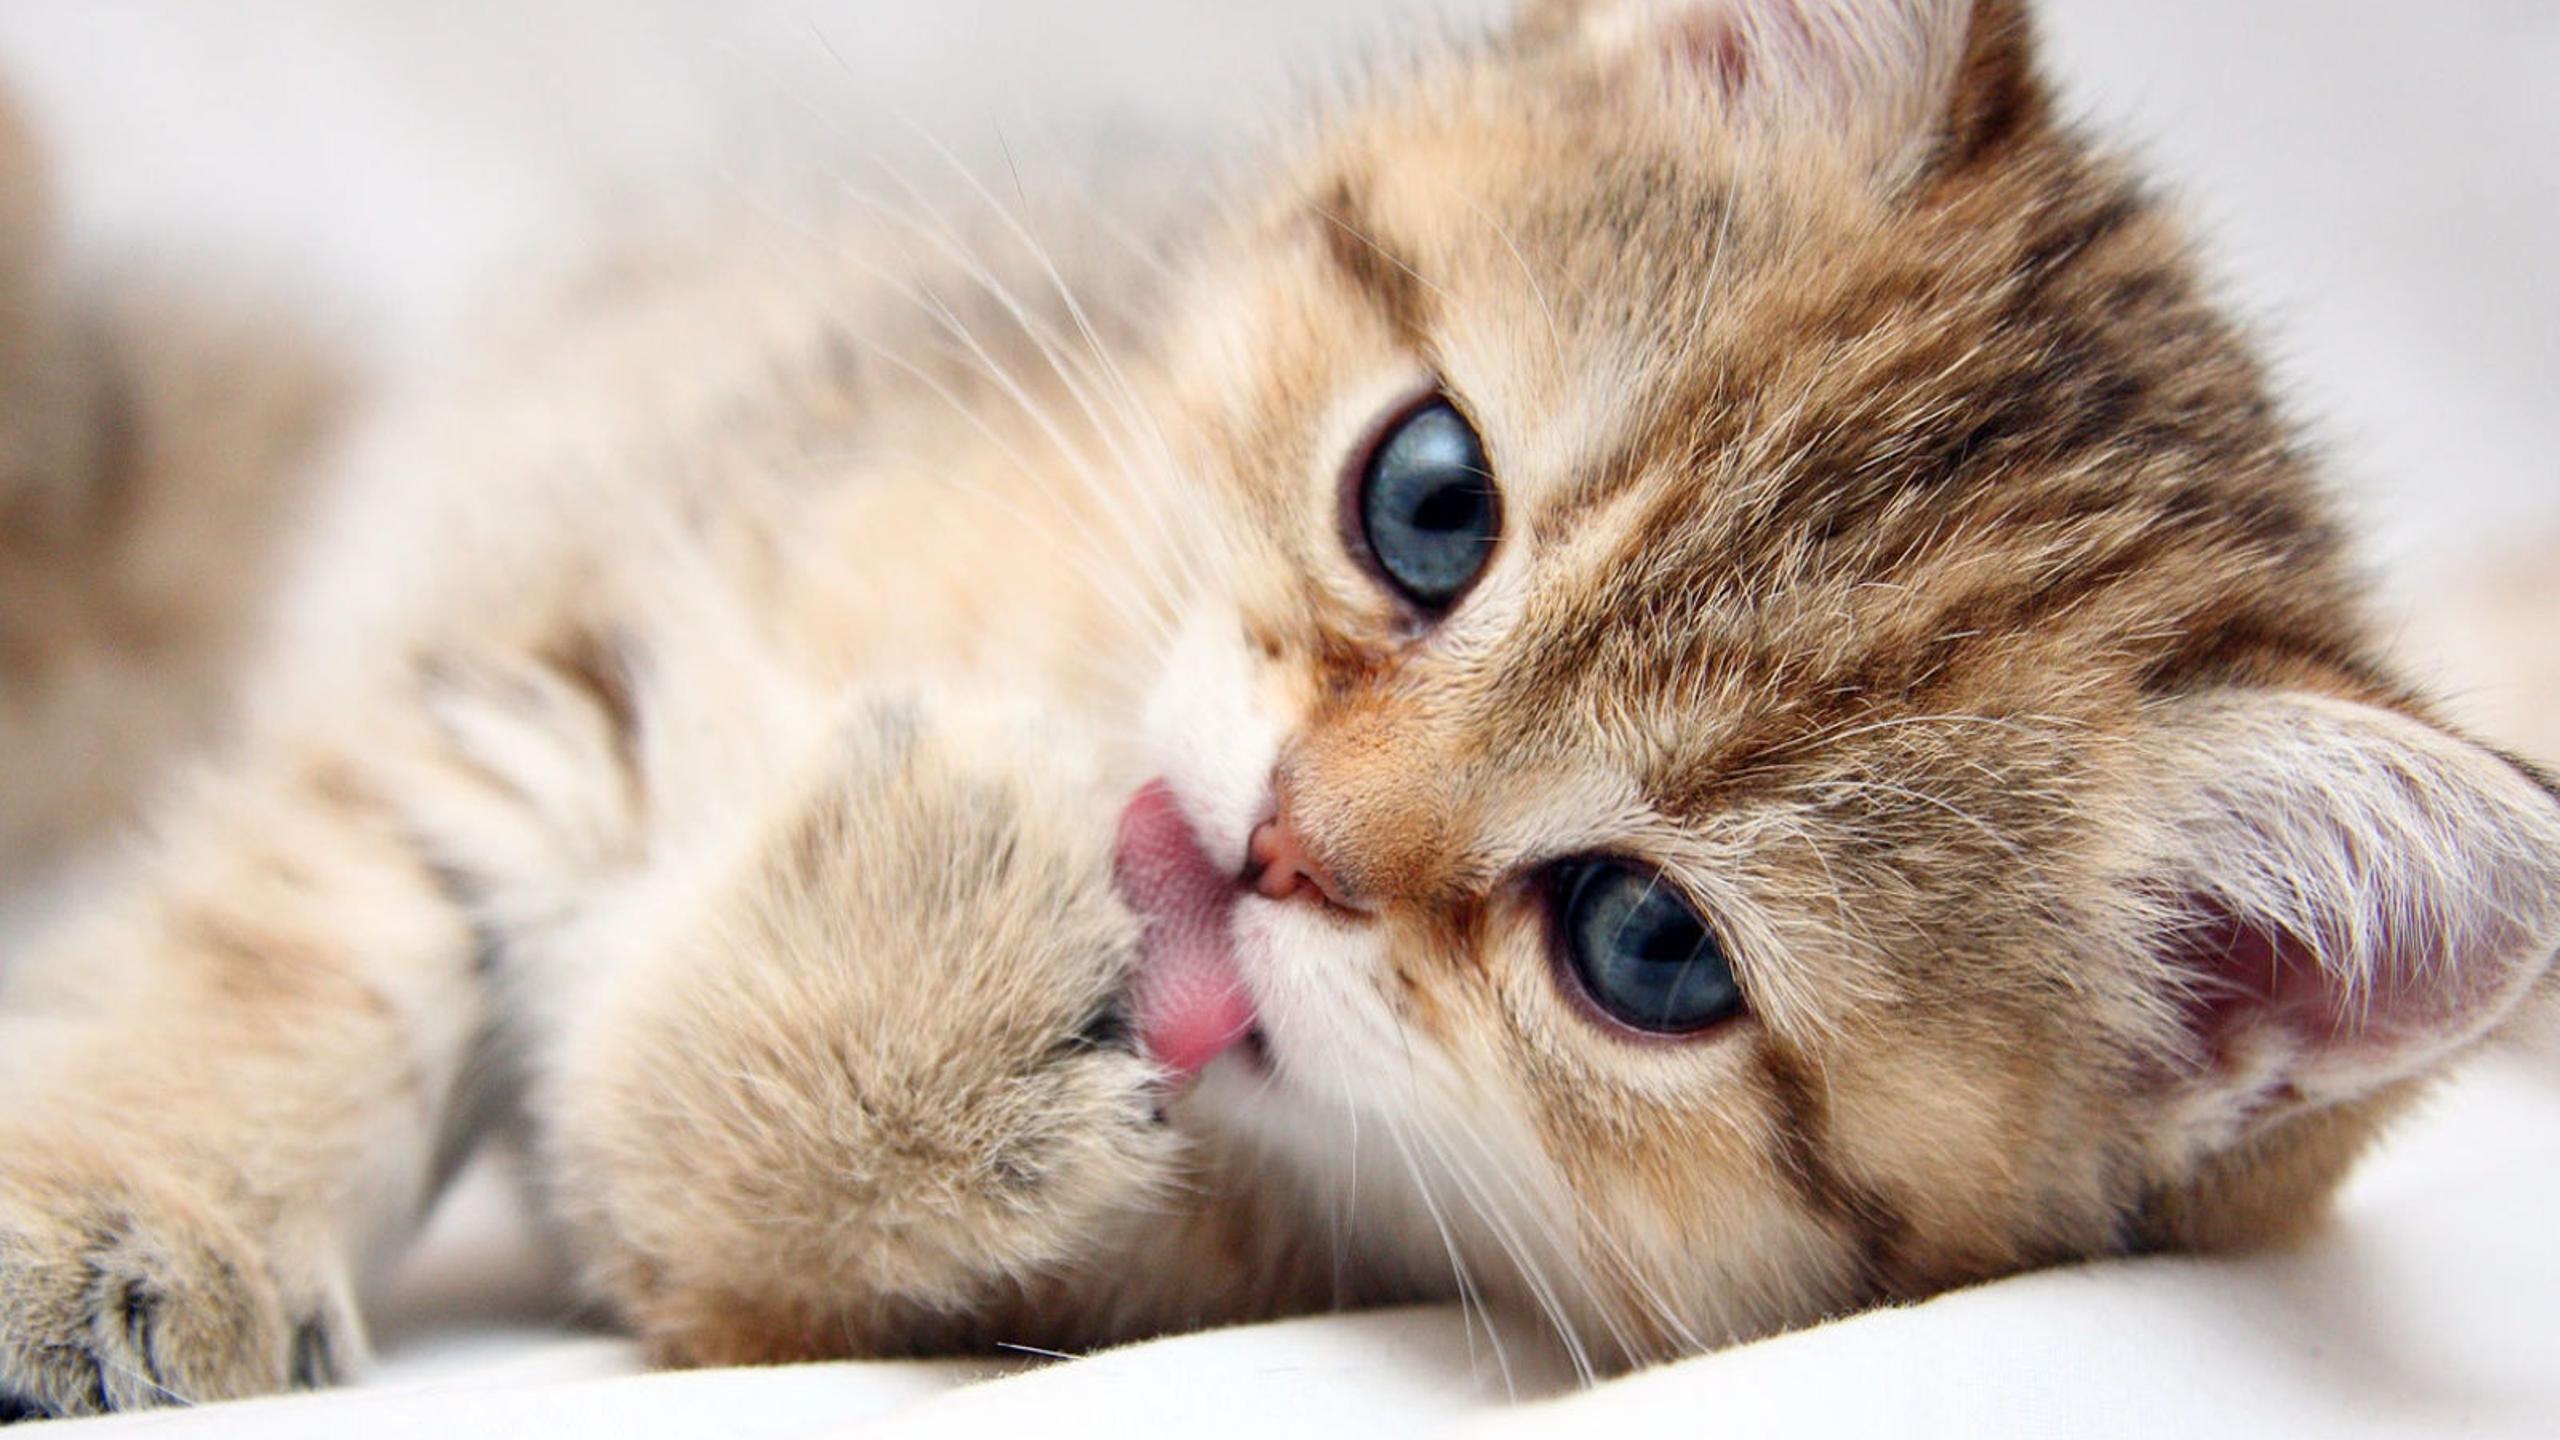 Sweet cat with tongue out